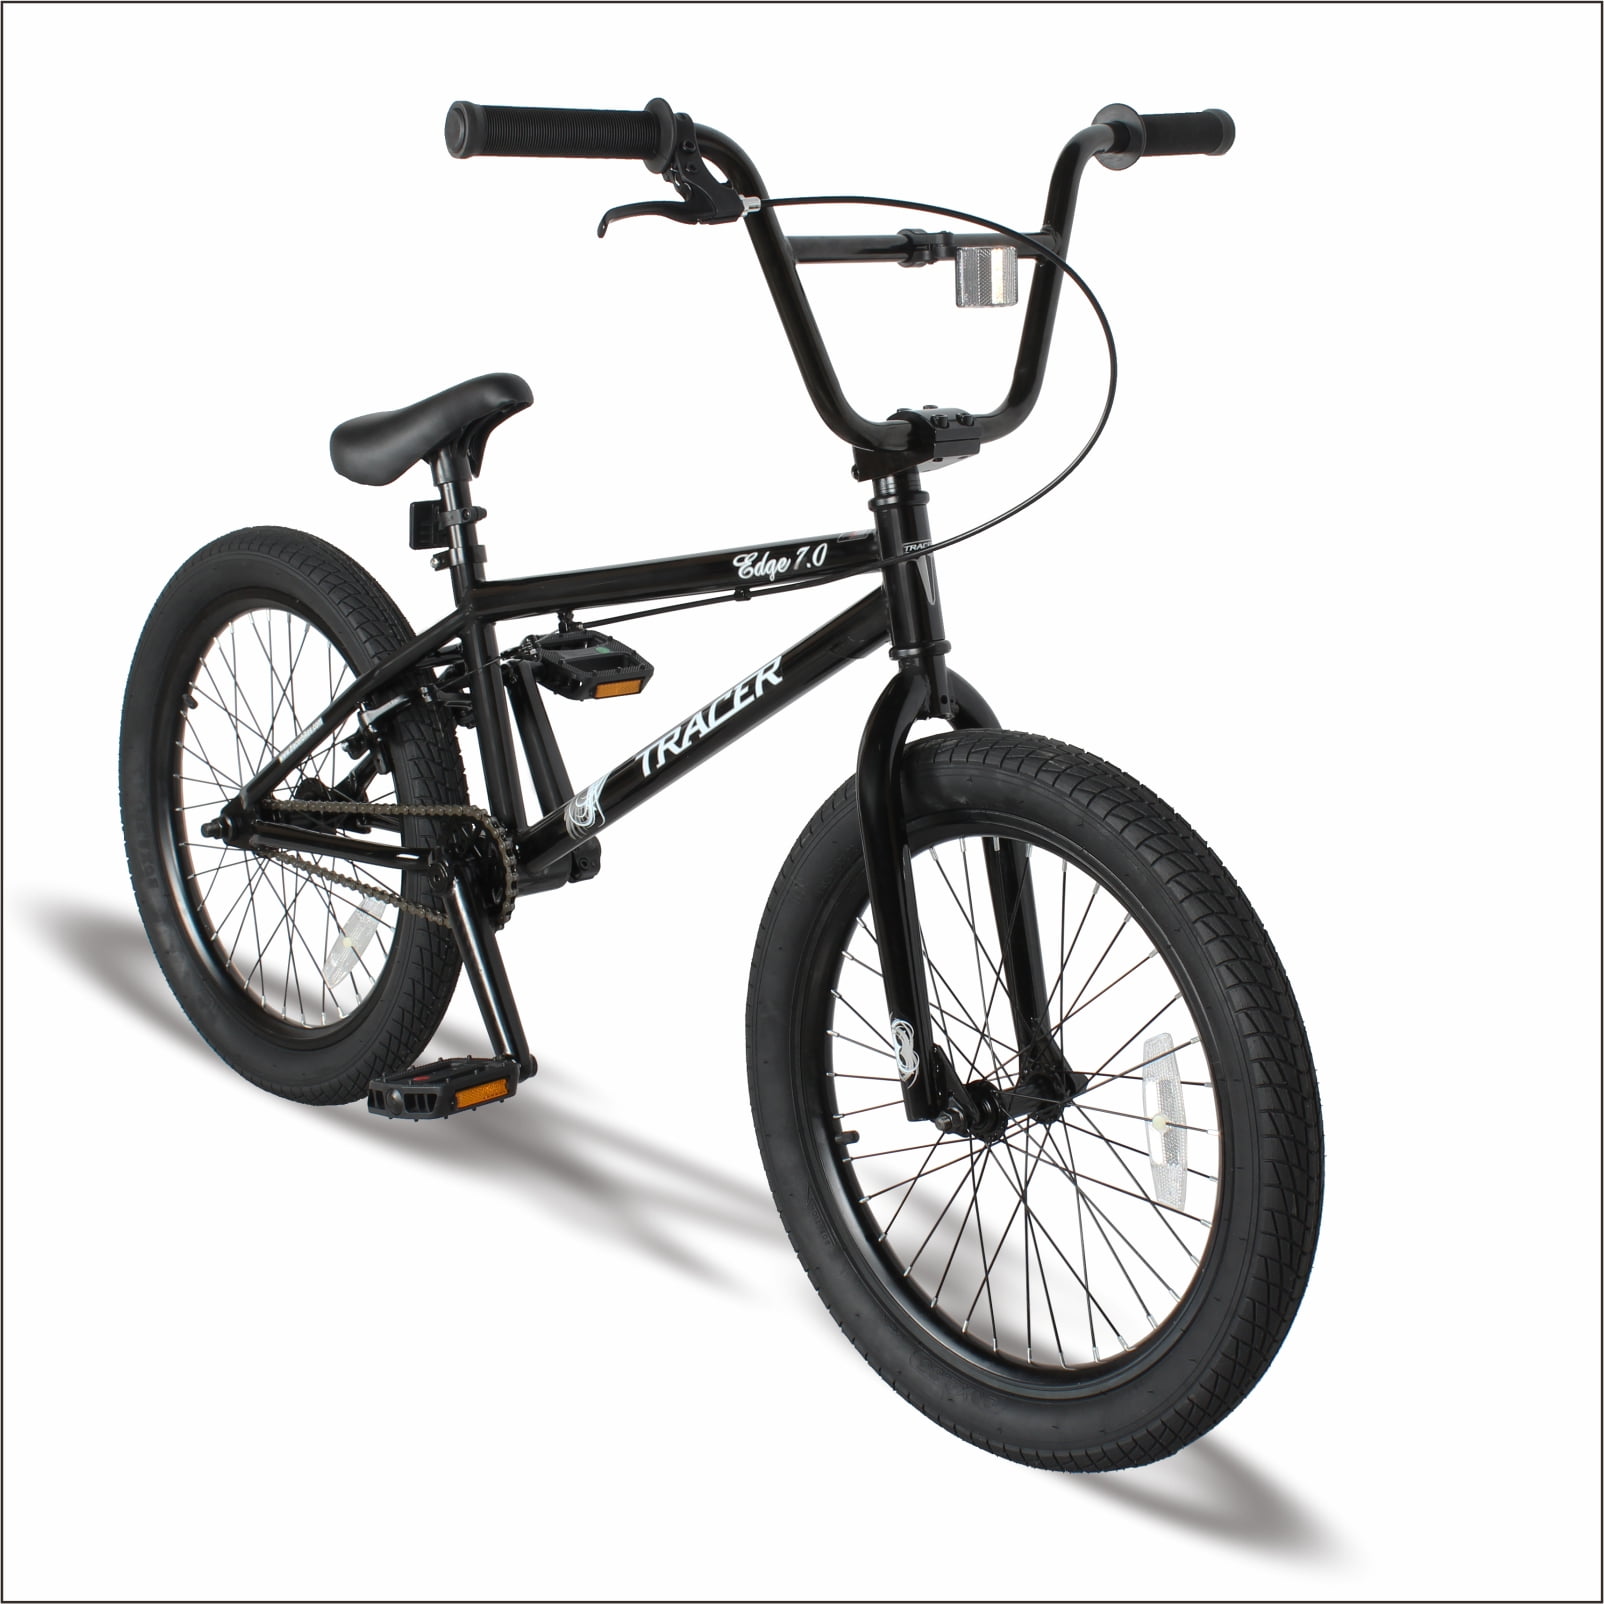 Hi-Ten Steel Frame TRACER Edge Freestyle BMX Bike for Adult and Beginner-Level to Advanced Riders,20 Inch Wheels 